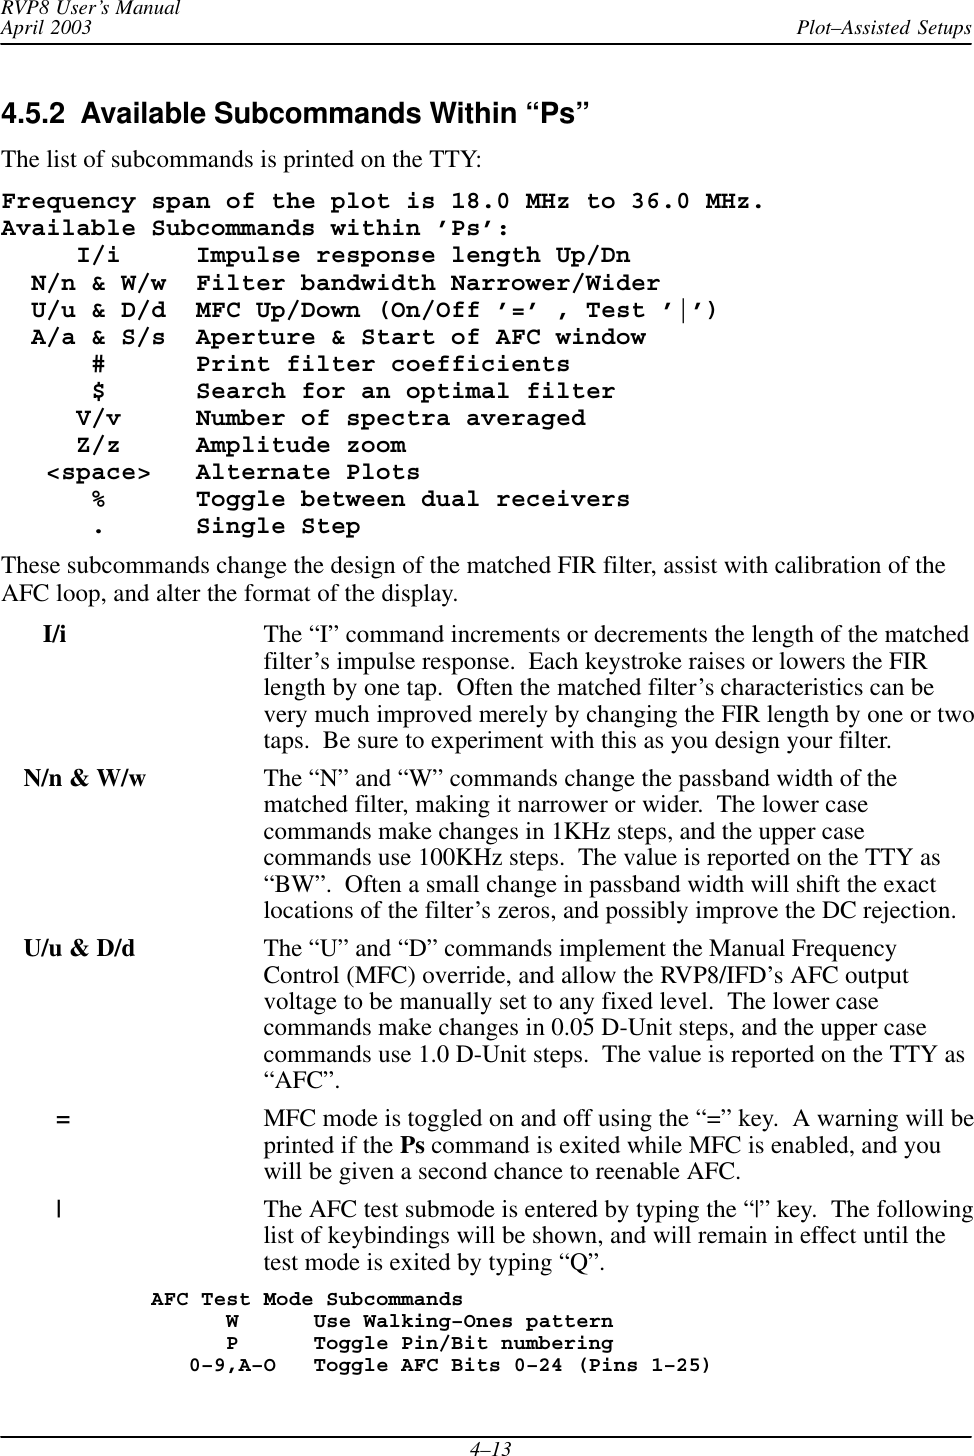 Plot–Assisted SetupsRVP8 User’s ManualApril 20034–134.5.2  Available Subcommands Within “Ps”The list of subcommands is printed on the TTY:Frequency span of the plot is 18.0 MHz to 36.0 MHz.Available Subcommands within ’Ps’:     I/i     Impulse response length Up/Dn  N/n &amp; W/w  Filter bandwidth Narrower/Wider  U/u &amp; D/d  MFC Up/Down (On/Off ’=’ , Test ’|’)  A/a &amp; S/s  Aperture &amp; Start of AFC window      #      Print filter coefficients      $      Search for an optimal filter     V/v     Number of spectra averaged     Z/z     Amplitude zoom   &lt;space&gt;   Alternate Plots      %      Toggle between dual receivers      .      Single StepThese subcommands change the design of the matched FIR filter, assist with calibration of theAFC loop, and alter the format of the display.   I/i The “I” command increments or decrements the length of the matchedfilter’s impulse response.  Each keystroke raises or lowers the FIRlength by one tap.  Often the matched filter’s characteristics can bevery much improved merely by changing the FIR length by one or twotaps.  Be sure to experiment with this as you design your filter.N/n &amp; W/w The “N” and “W” commands change the passband width of thematched filter, making it narrower or wider.  The lower casecommands make changes in 1KHz steps, and the upper casecommands use 100KHz steps.  The value is reported on the TTY as“BW”.  Often a small change in passband width will shift the exactlocations of the filter’s zeros, and possibly improve the DC rejection.U/u &amp; D/d The “U” and “D” commands implement the Manual FrequencyControl (MFC) override, and allow the RVP8/IFD’s AFC outputvoltage to be manually set to any fixed level.  The lower casecommands make changes in 0.05 D-Unit steps, and the upper casecommands use 1.0 D-Unit steps.  The value is reported on the TTY as“AFC”.=MFC mode is toggled on and off using the “=” key.  A warning will beprinted if the Ps command is exited while MFC is enabled, and youwill be given a second chance to reenable AFC.|The AFC test submode is entered by typing the “|” key.  The followinglist of keybindings will be shown, and will remain in effect until thetest mode is exited by typing “Q”.AFC Test Mode Subcommands      W      Use Walking–Ones pattern      P      Toggle Pin/Bit numbering   0–9,A–O   Toggle AFC Bits 0–24 (Pins 1–25)